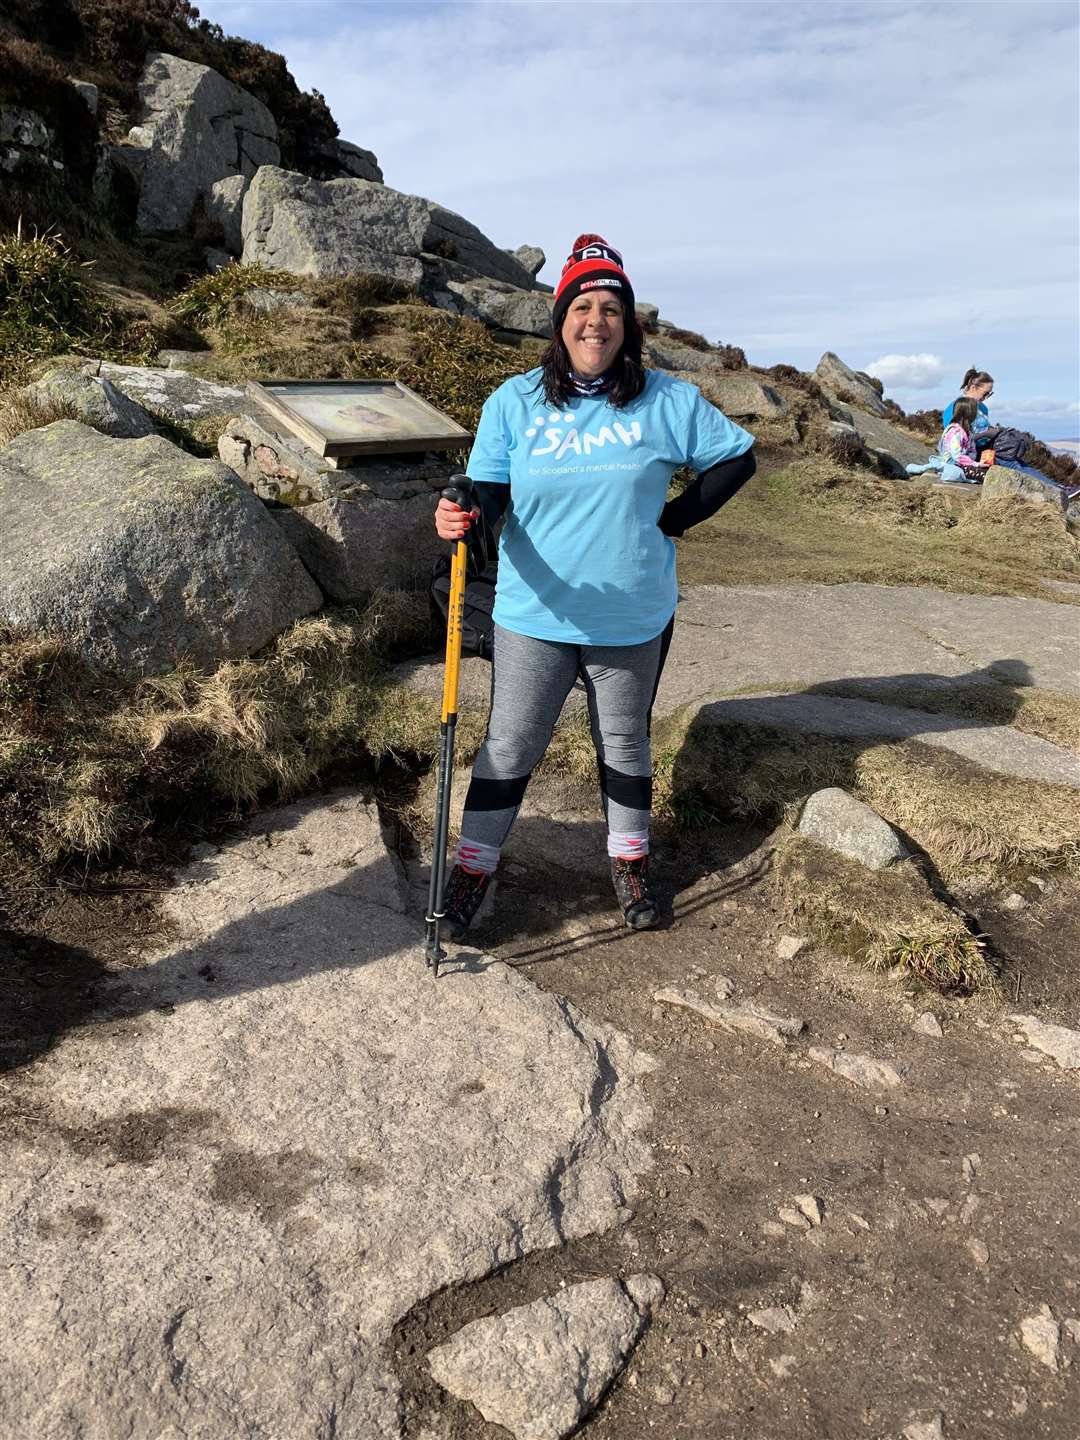 Emma Strathdee is climbing Bennachie every day for 28 days to raise money for mental health charity SAMH.